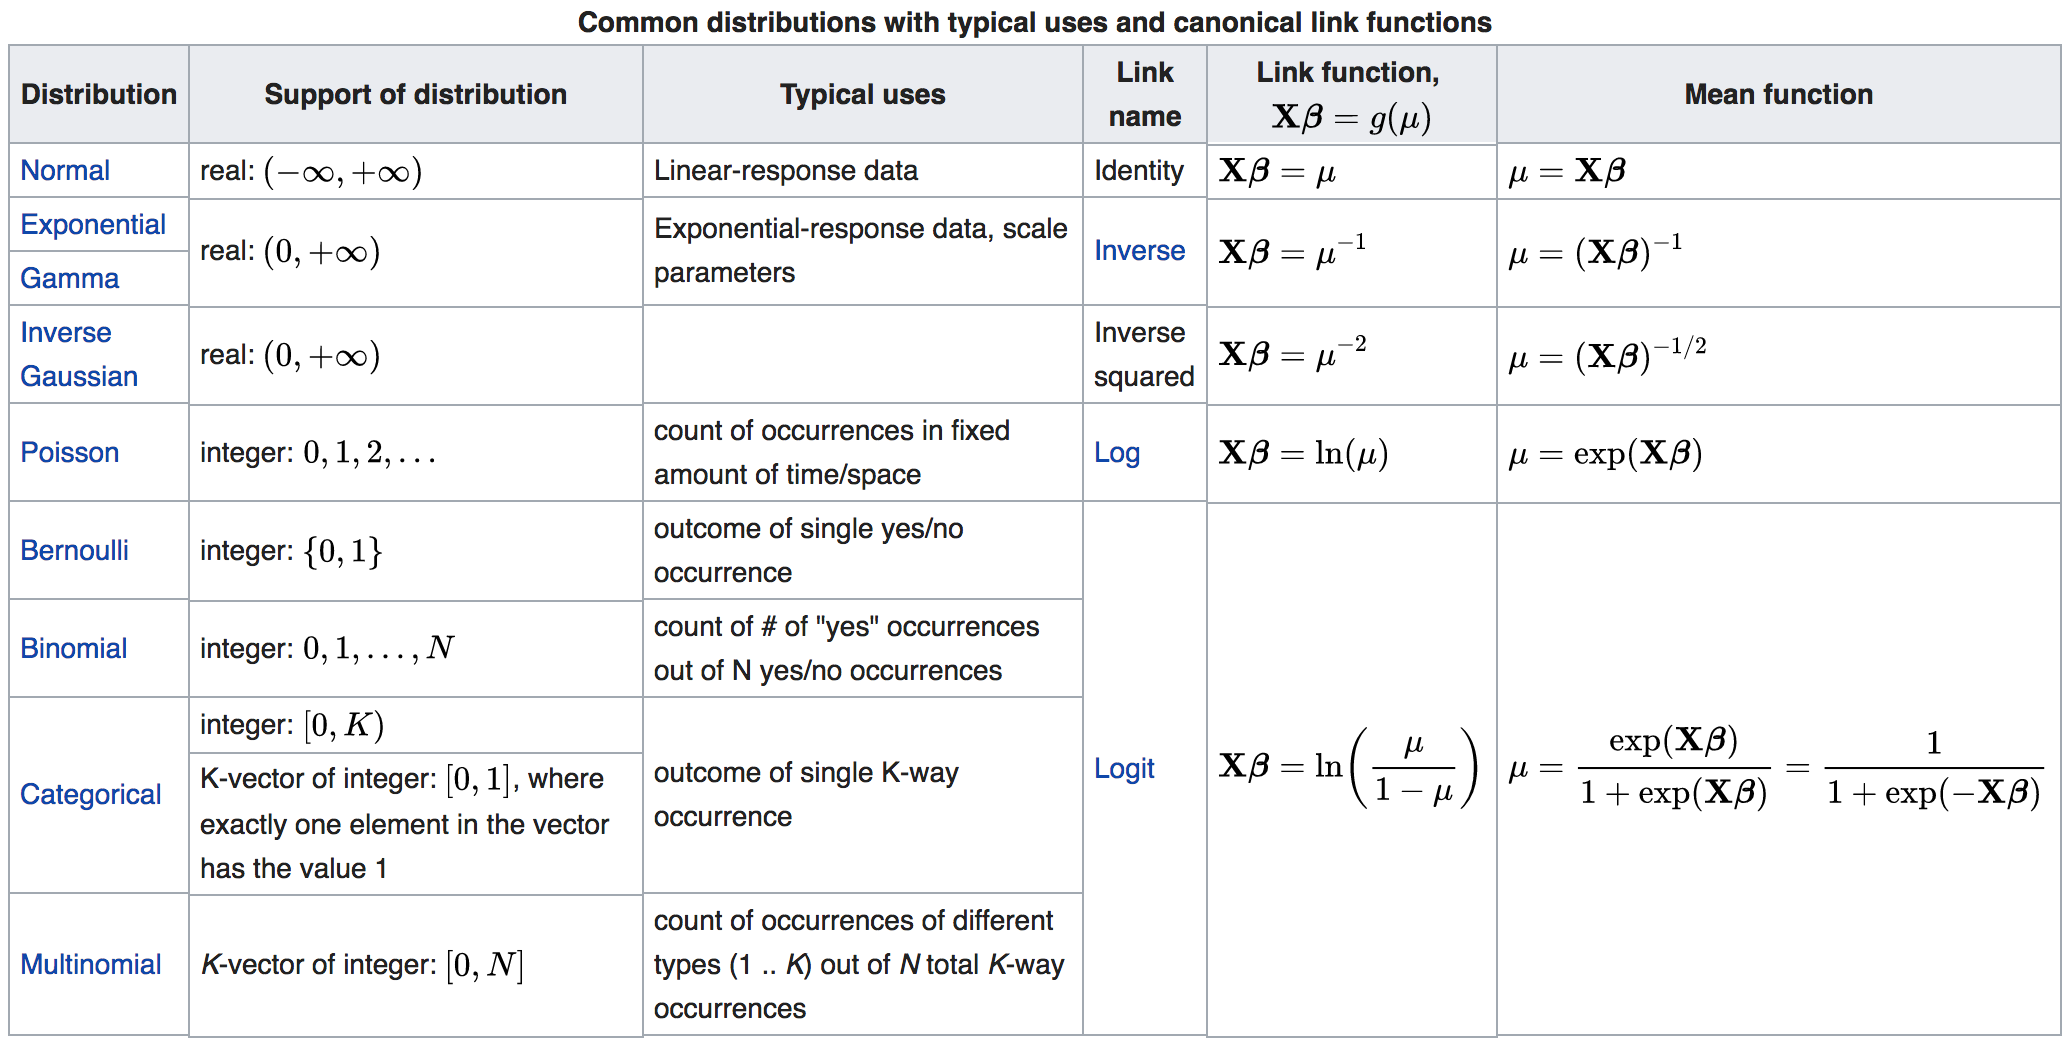 Common statistical distributions, their description, use, and default link function information.